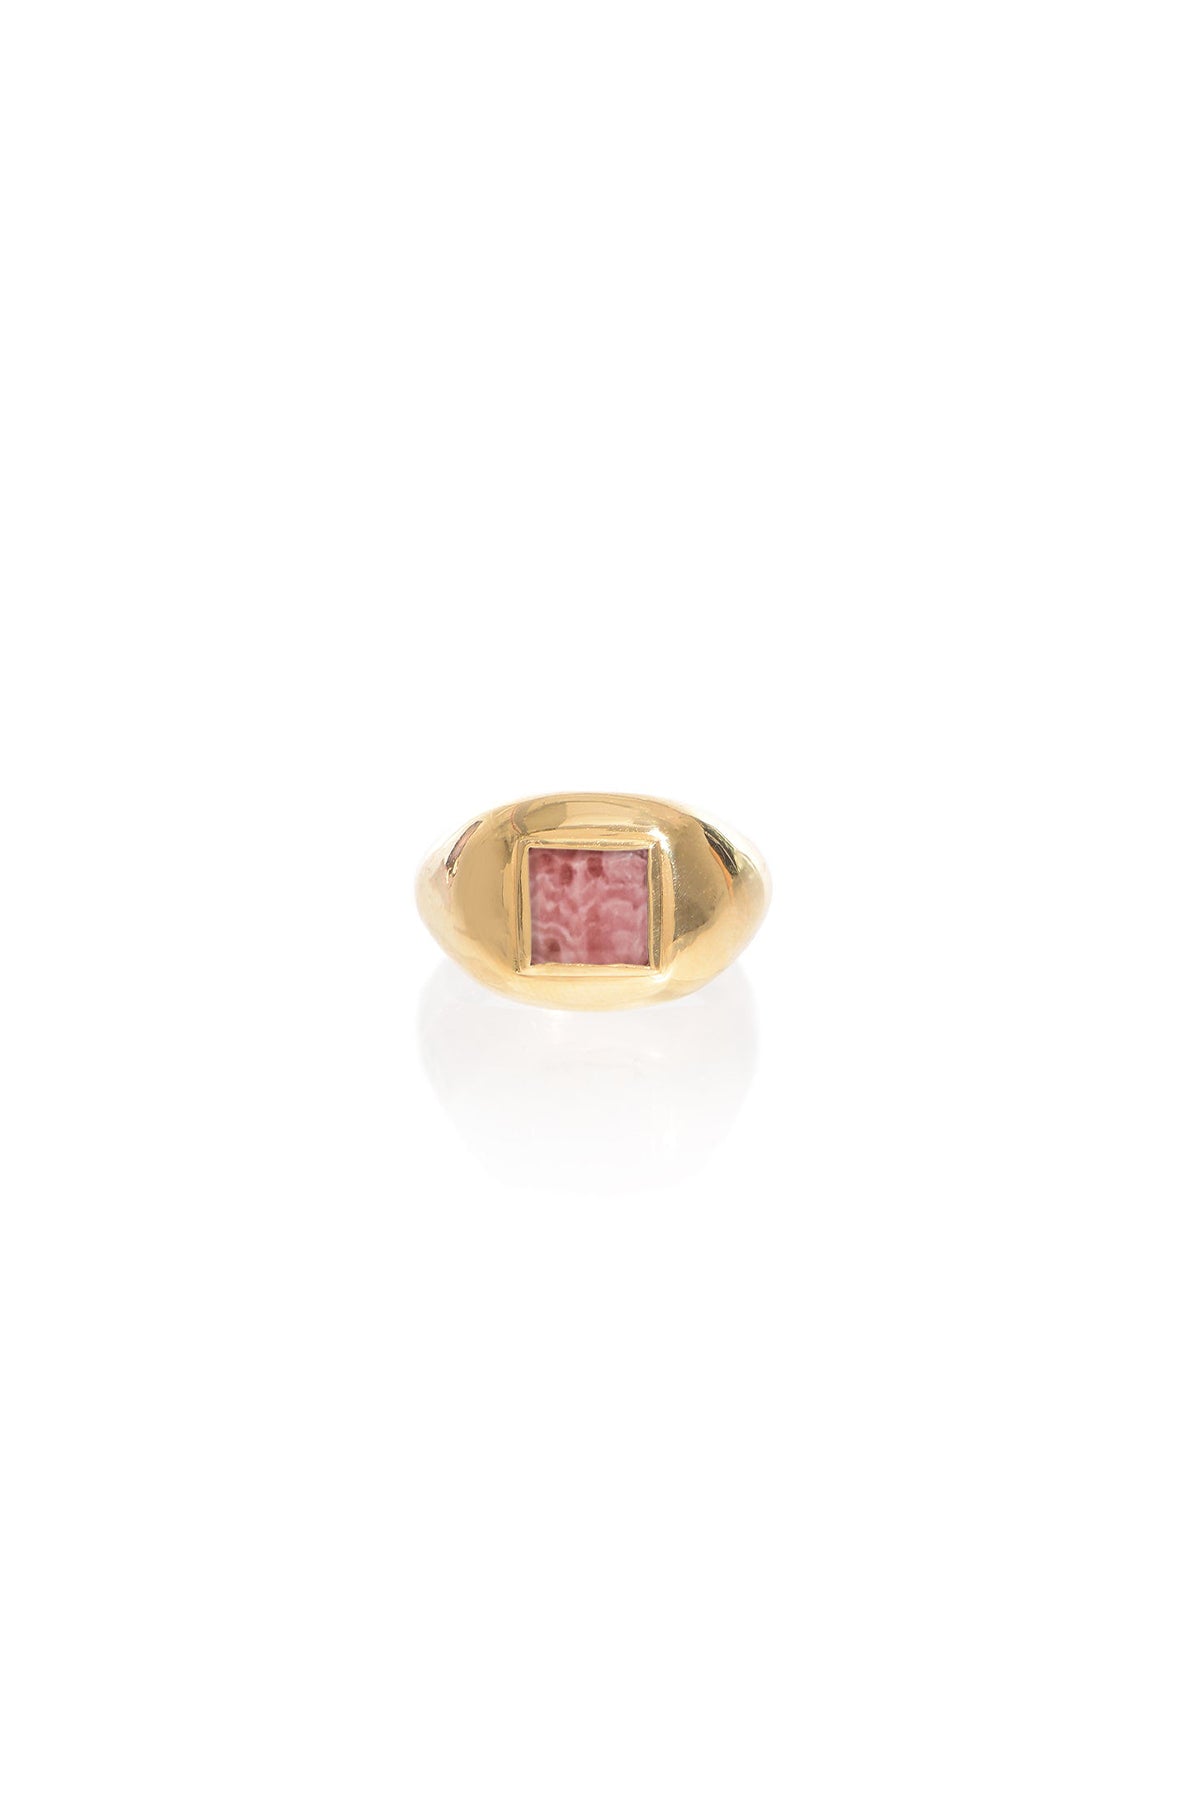 Medium Ring in 18k Gold & Pink Marble Stone